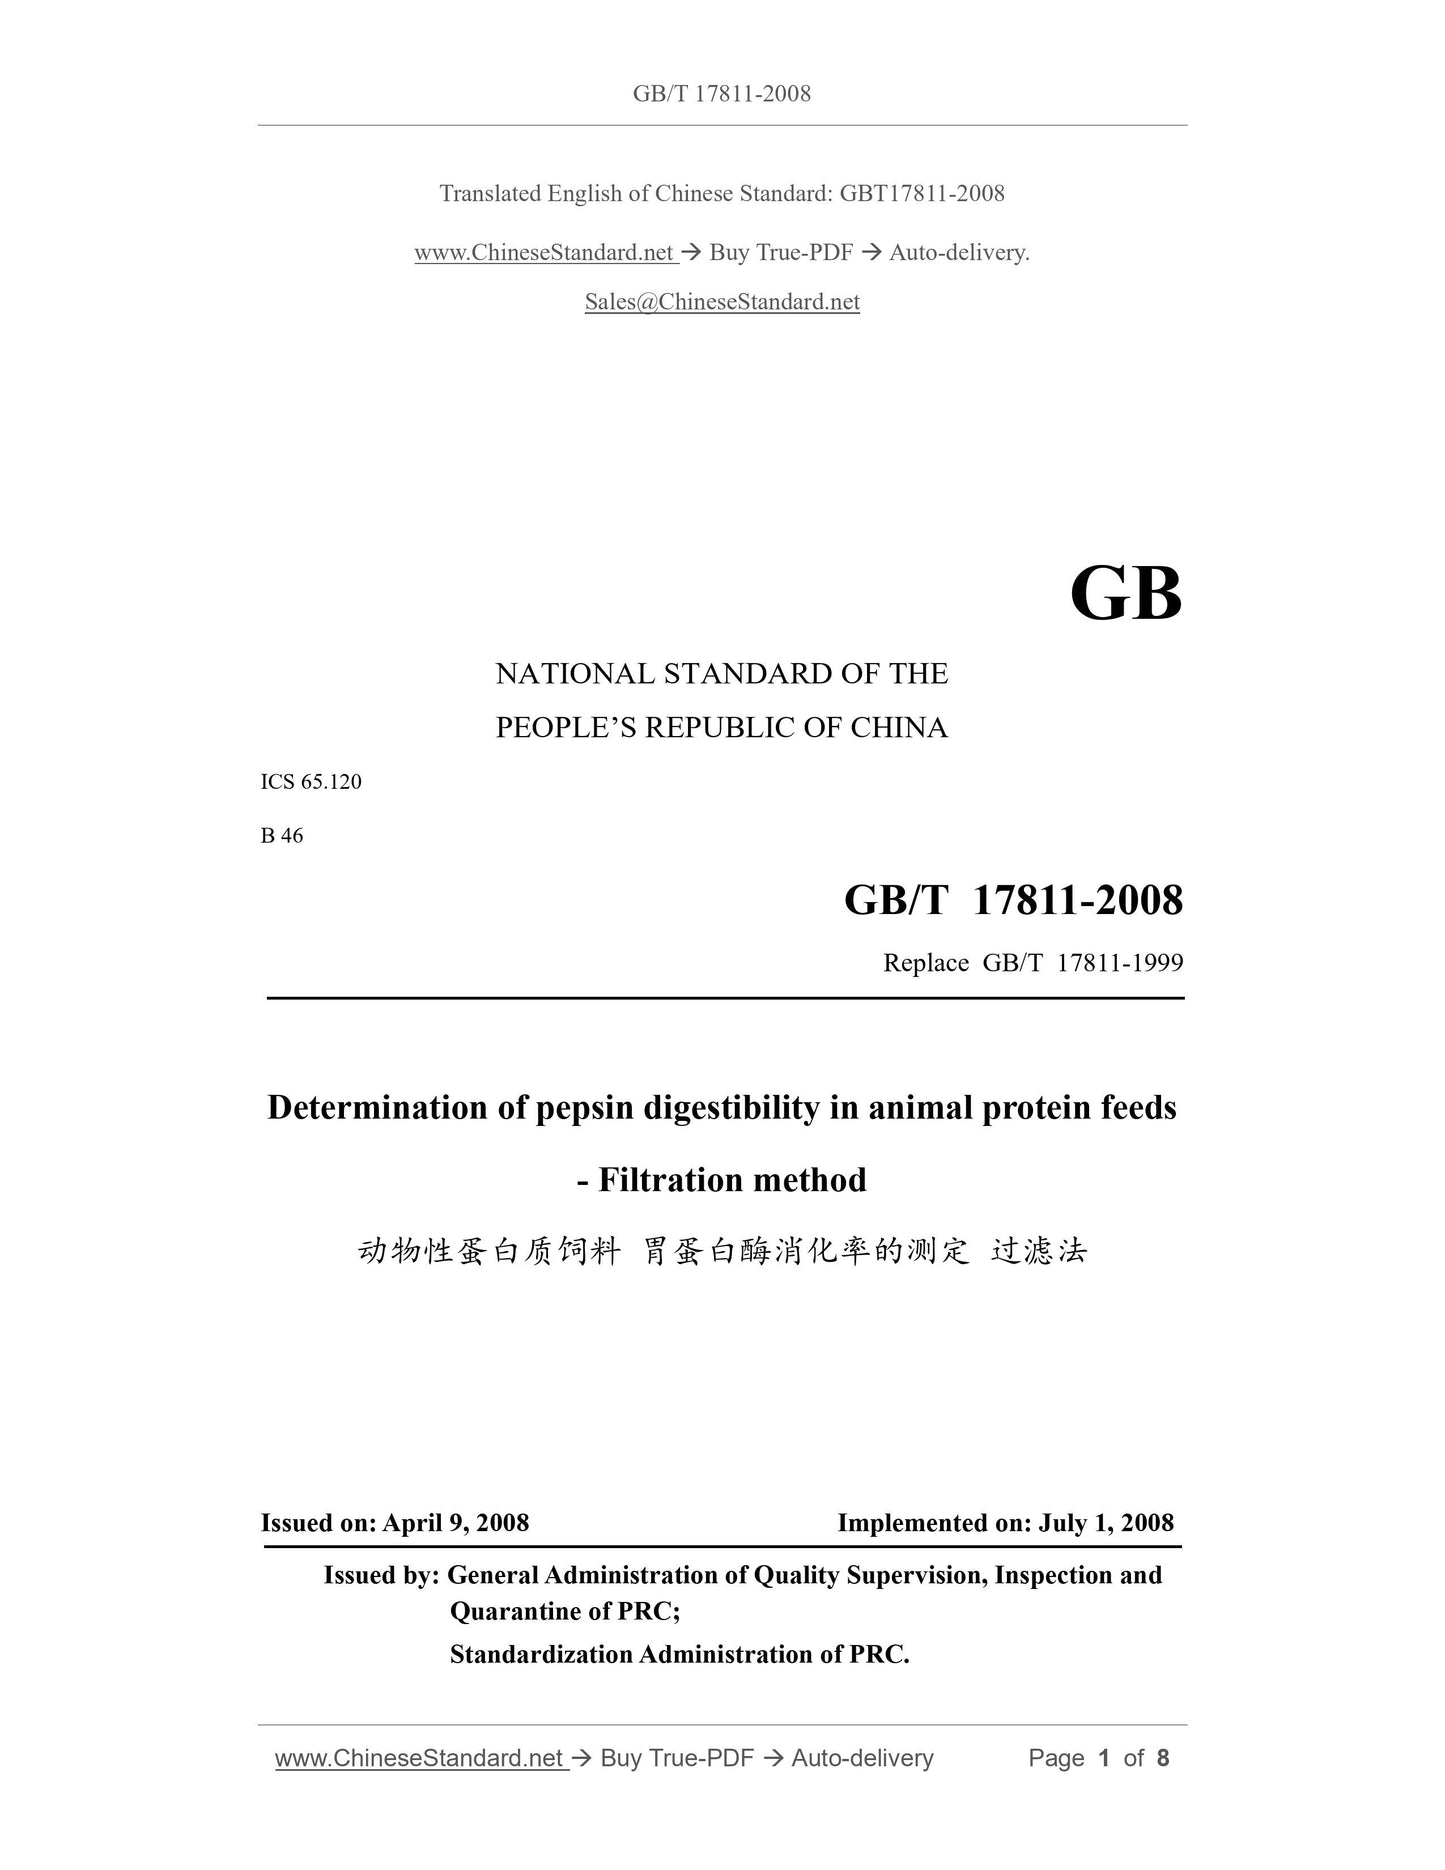 GB/T 17811-2008 Page 1